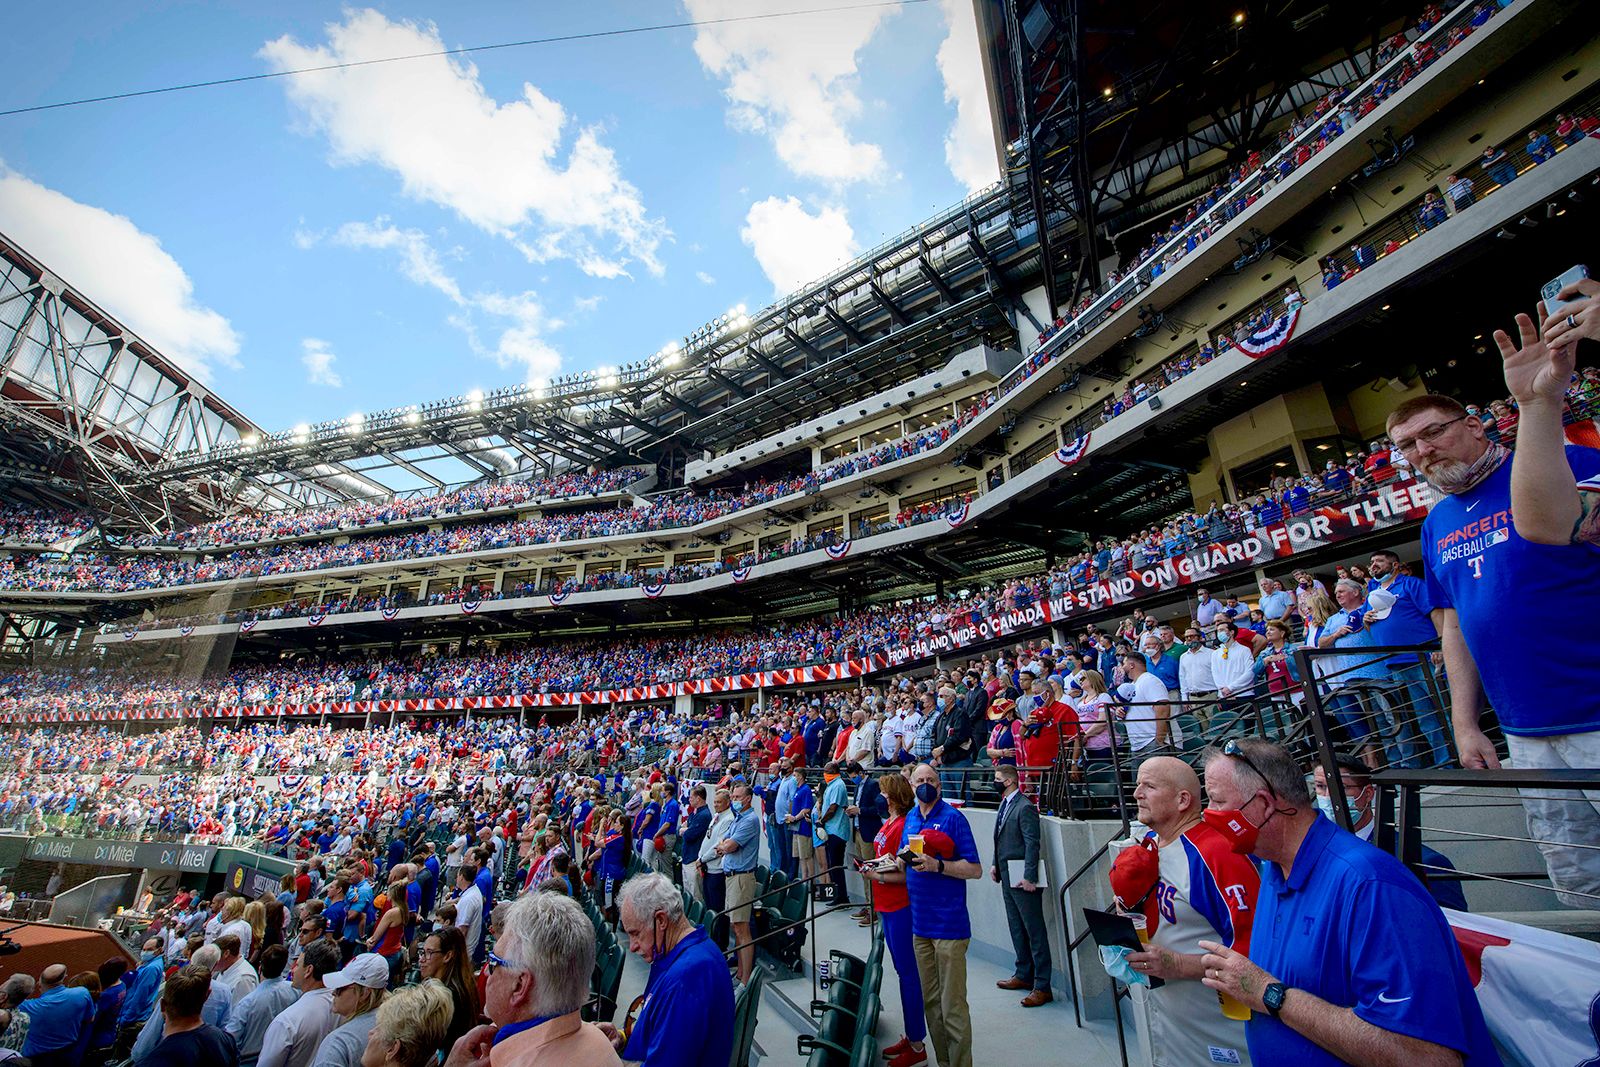 Taxpayers may help pay for the Rangers' $1bn ballpark – but at